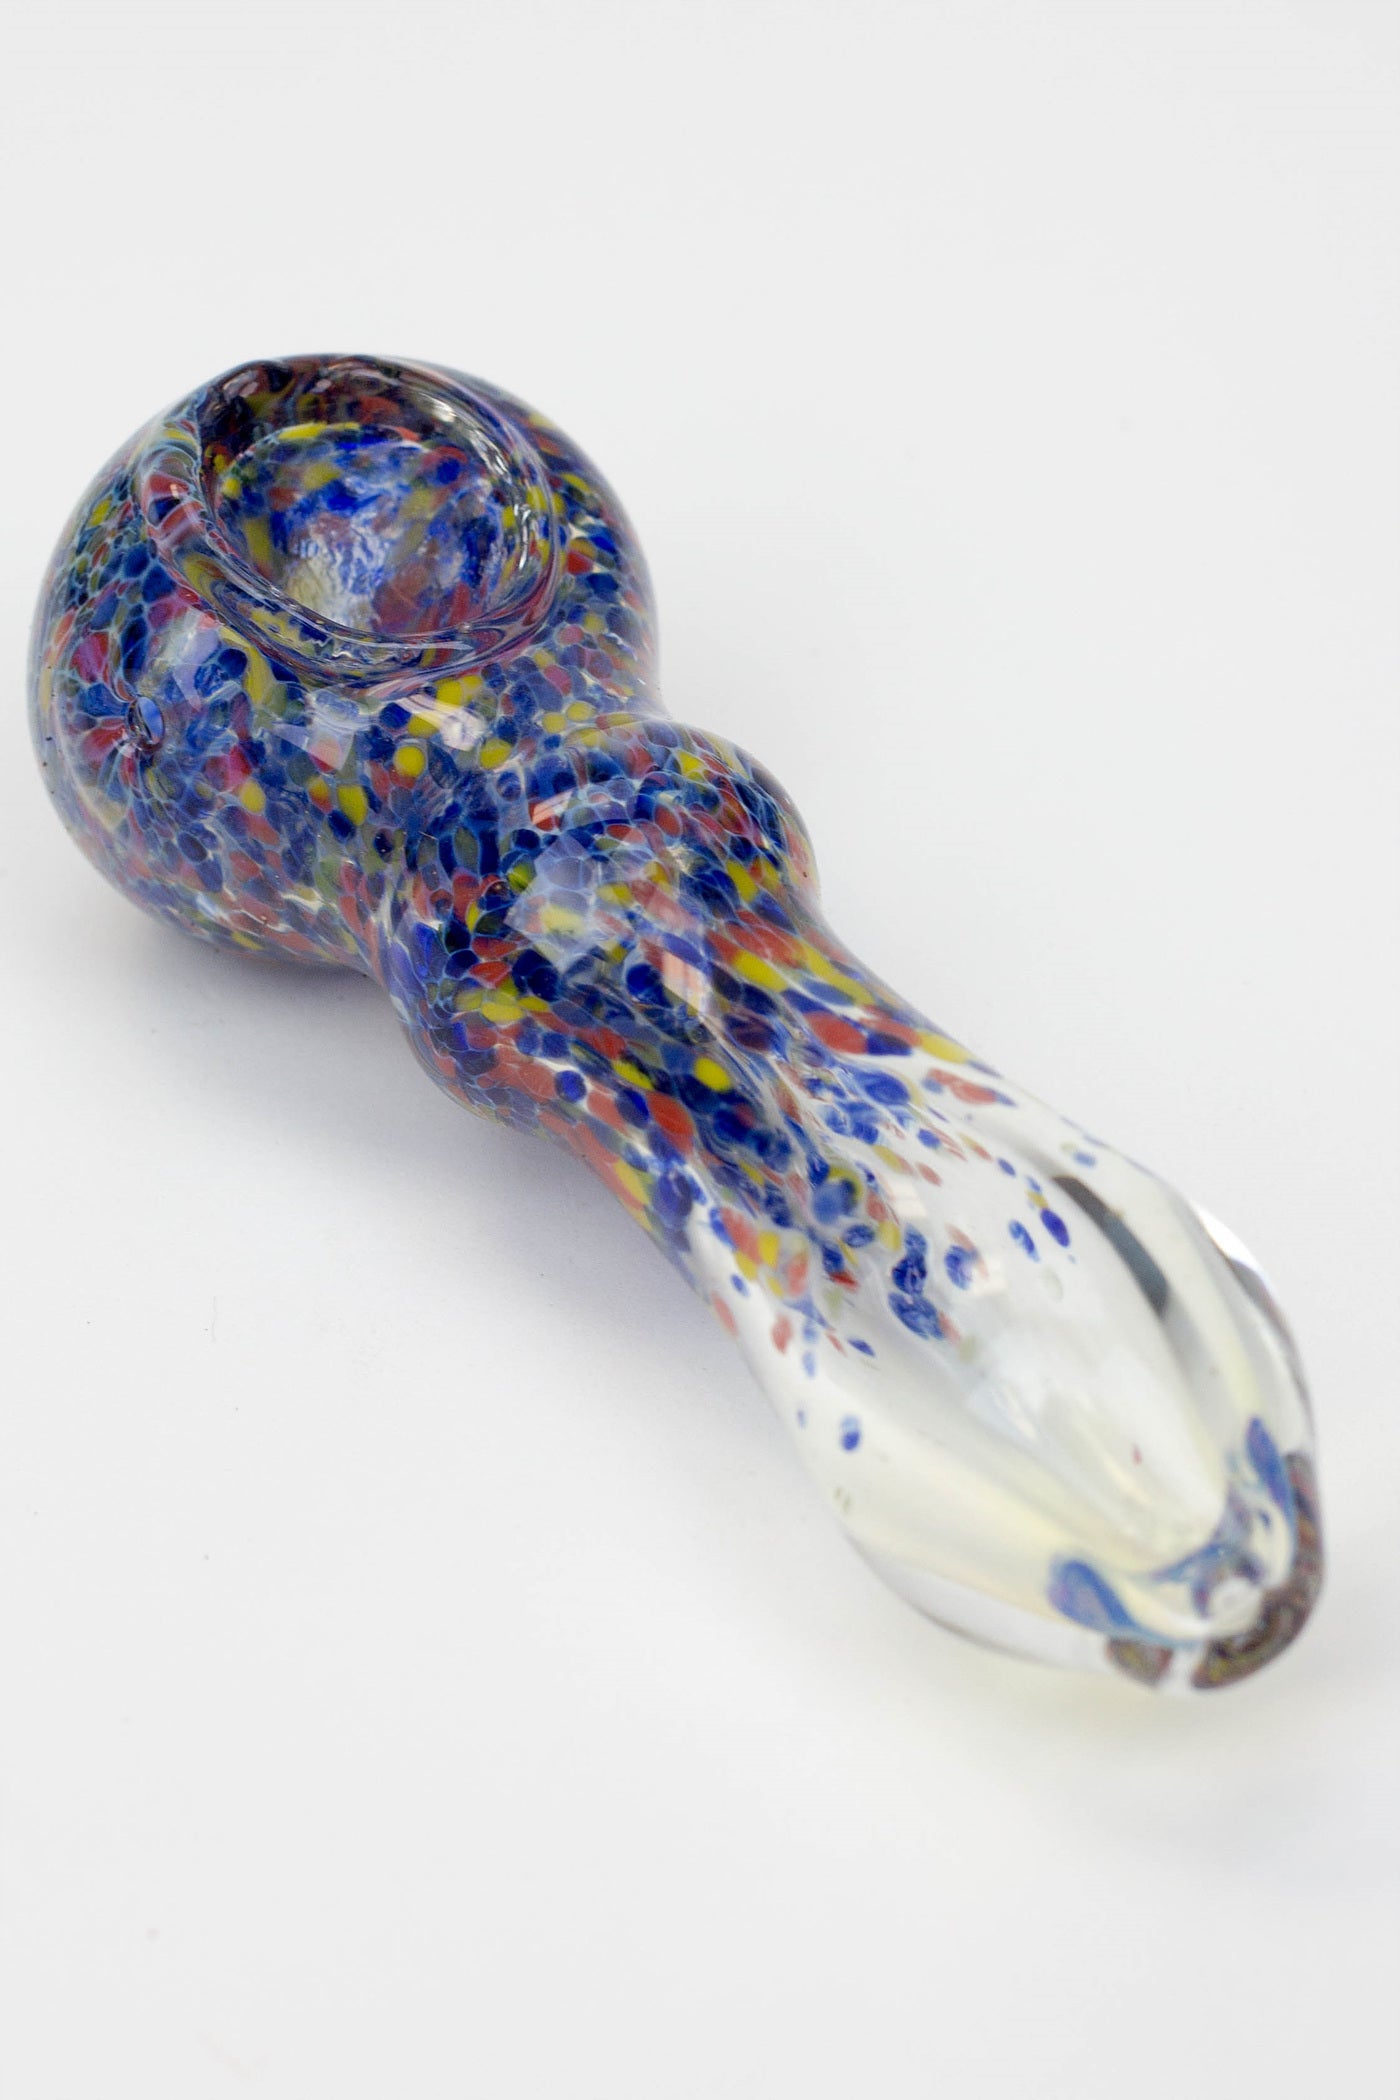 4.5" soft glass 8561 hand pipe - 140_2